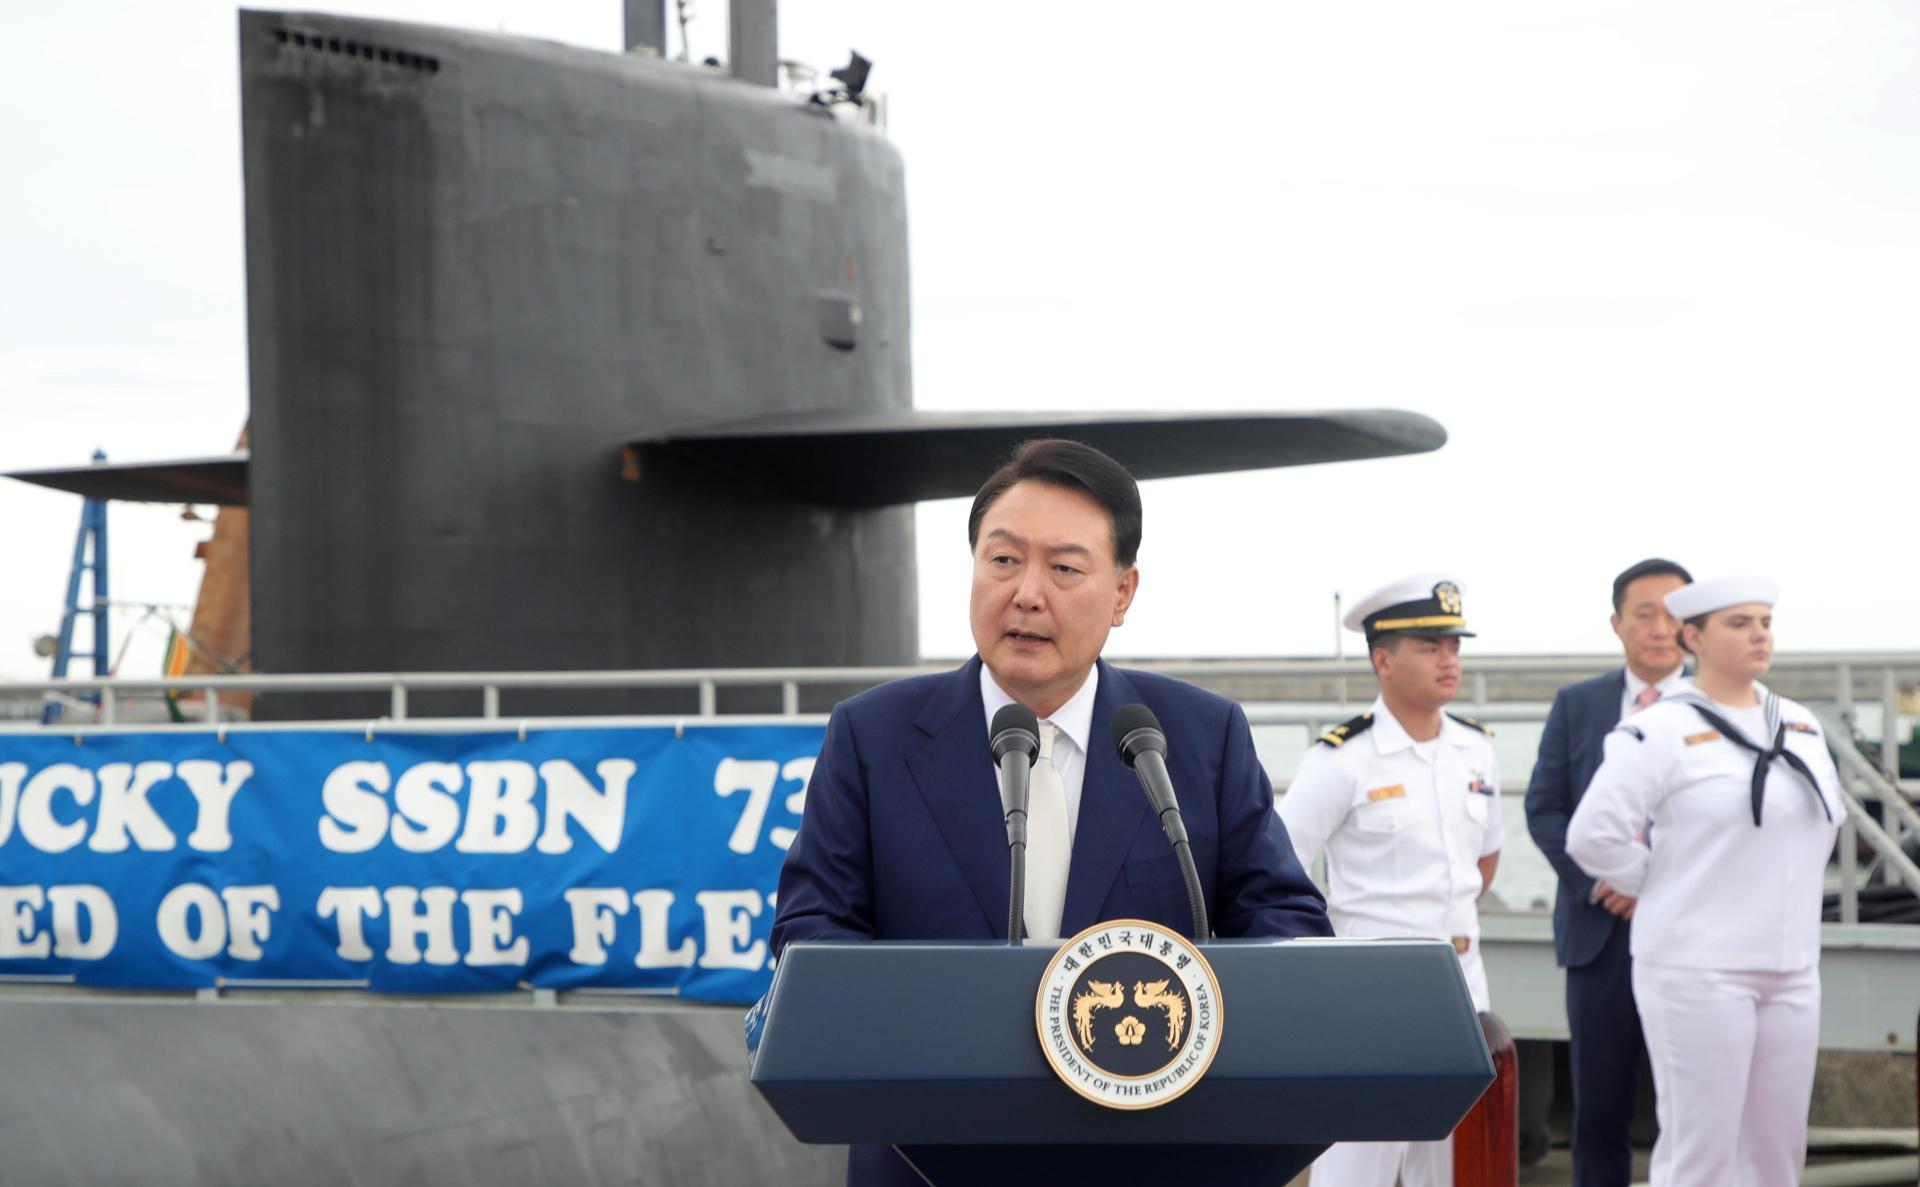 South Korean President Yoon Suk Yeol delivers a speech during a visit to the USS Kentucky (SSBN 737), a nuclear-powered ballistic missile submarine, docking at the South Korean naval operations base in Busan, southeast of Seoul, South Korea, 19 July 2023. EFE/EPA/KOREA POOL SOUTH KOREA OUT